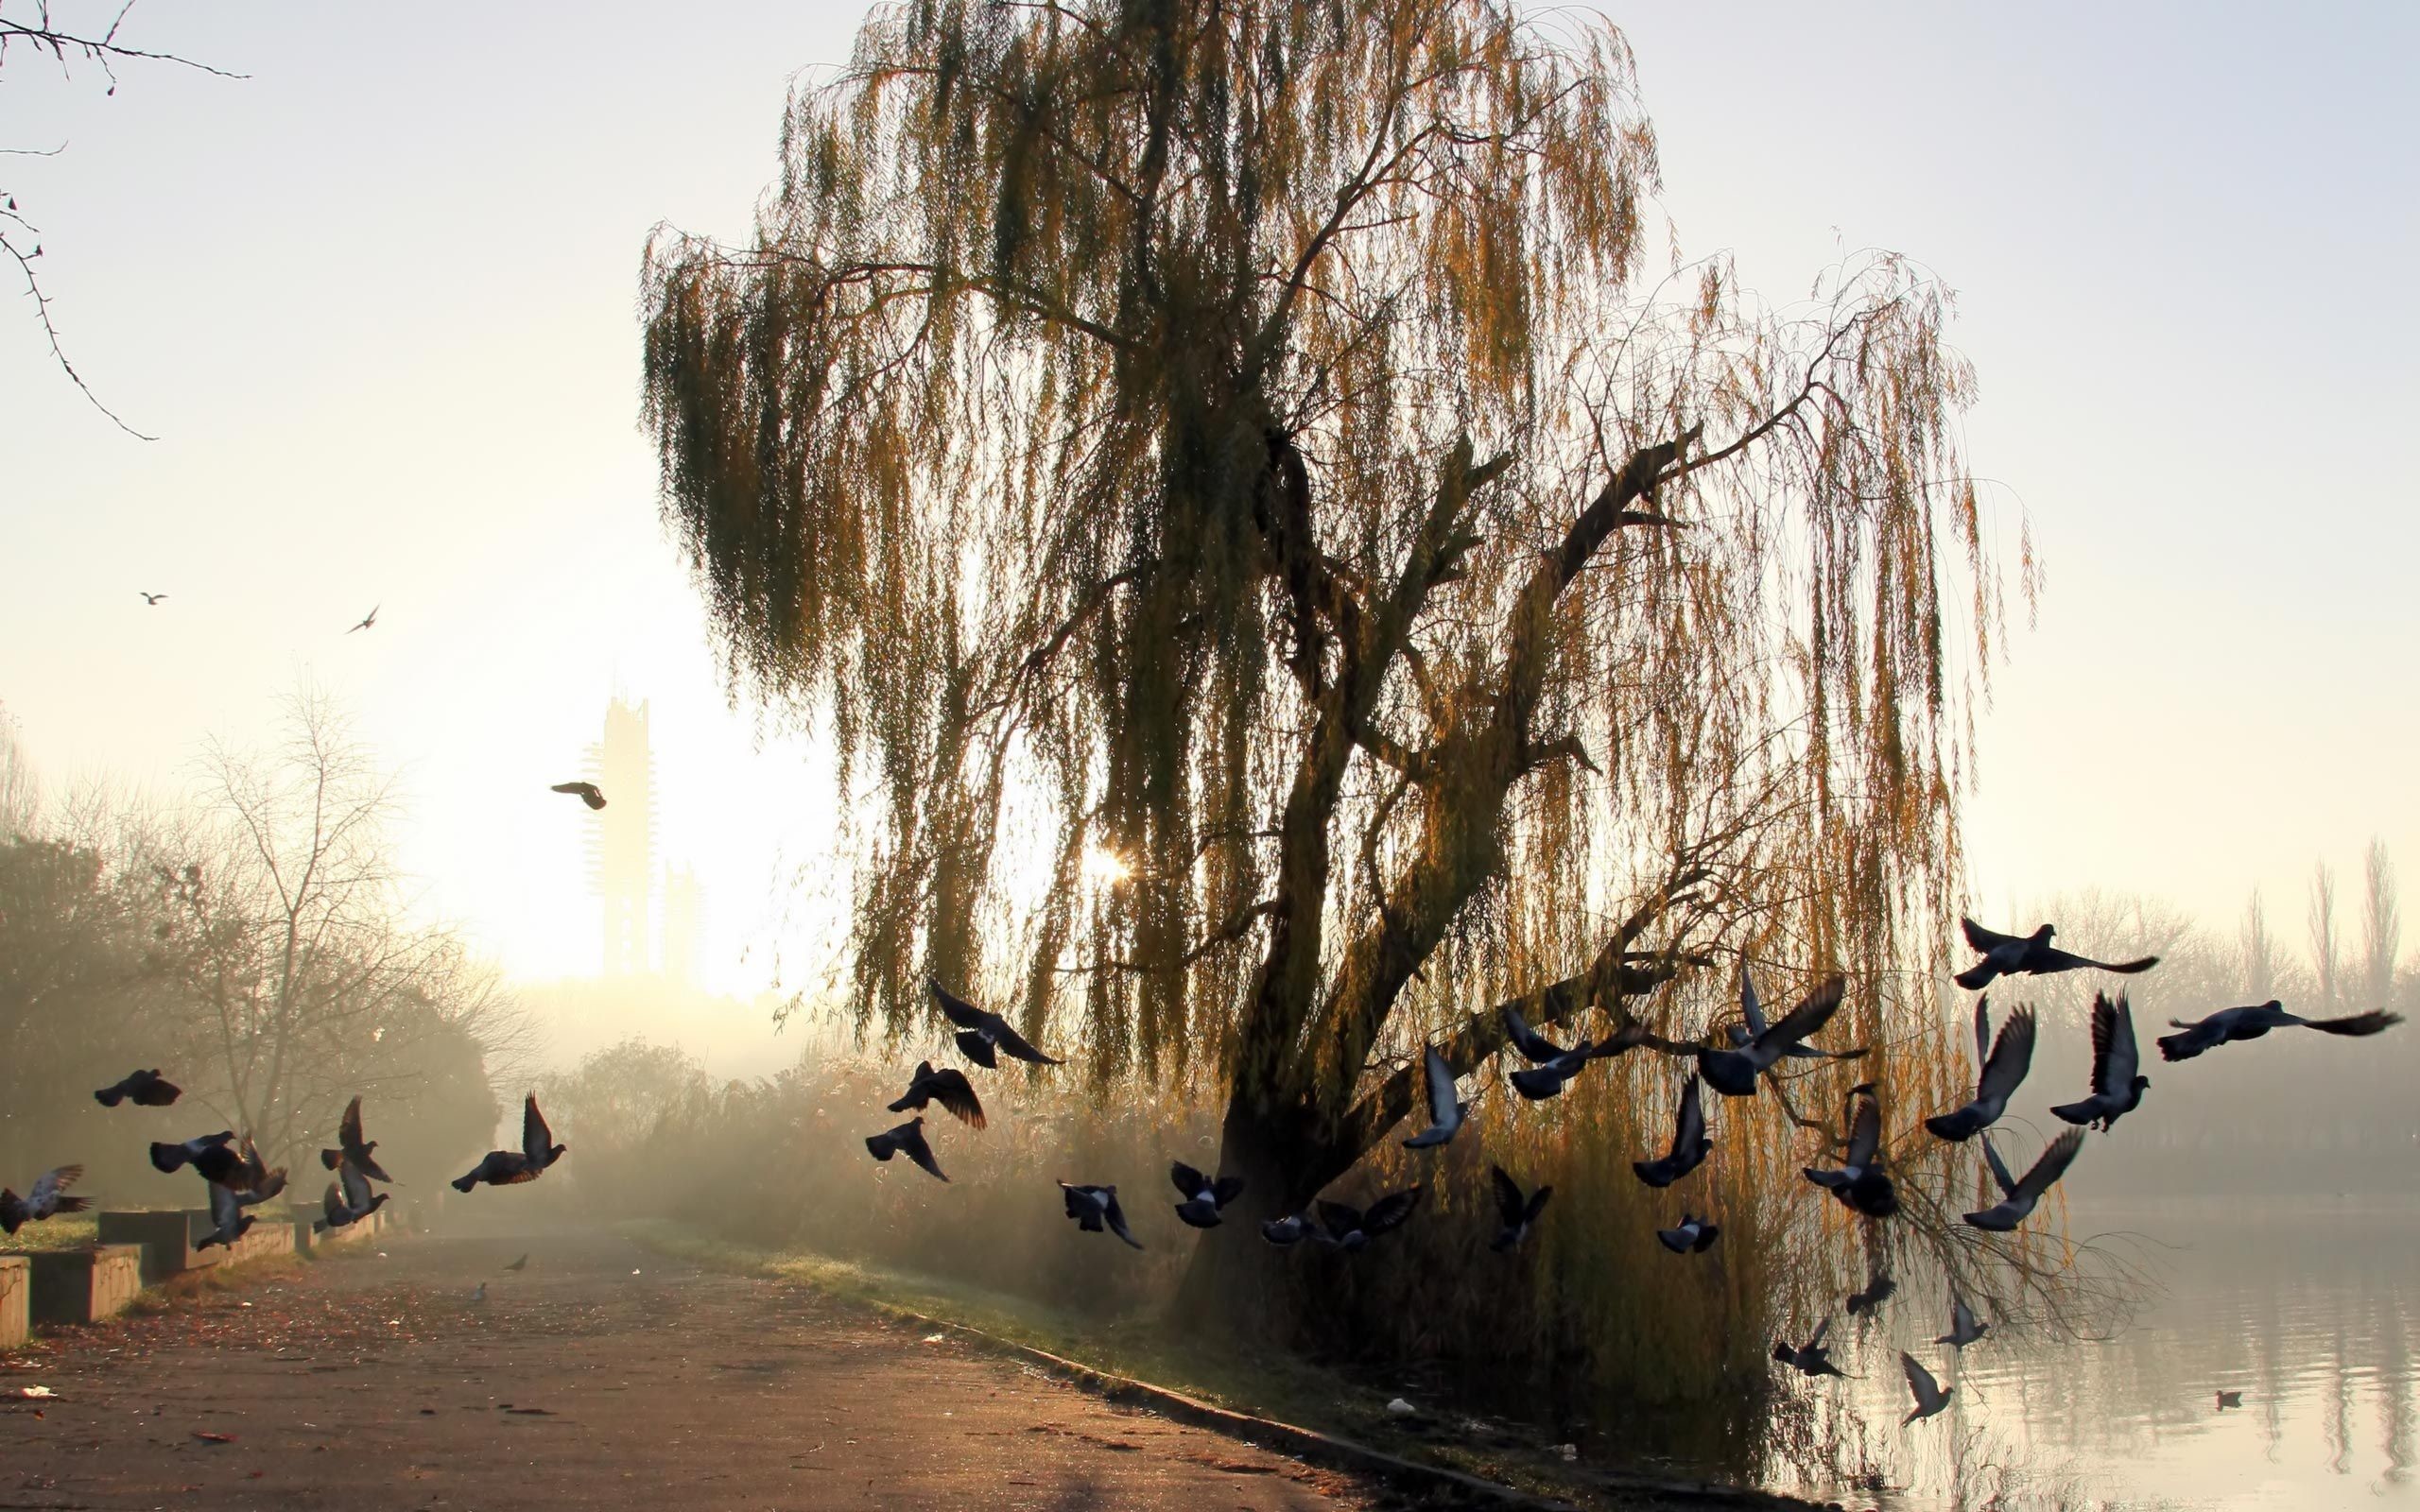 2560x1600  Weeping willow by the pond - wallpaper download